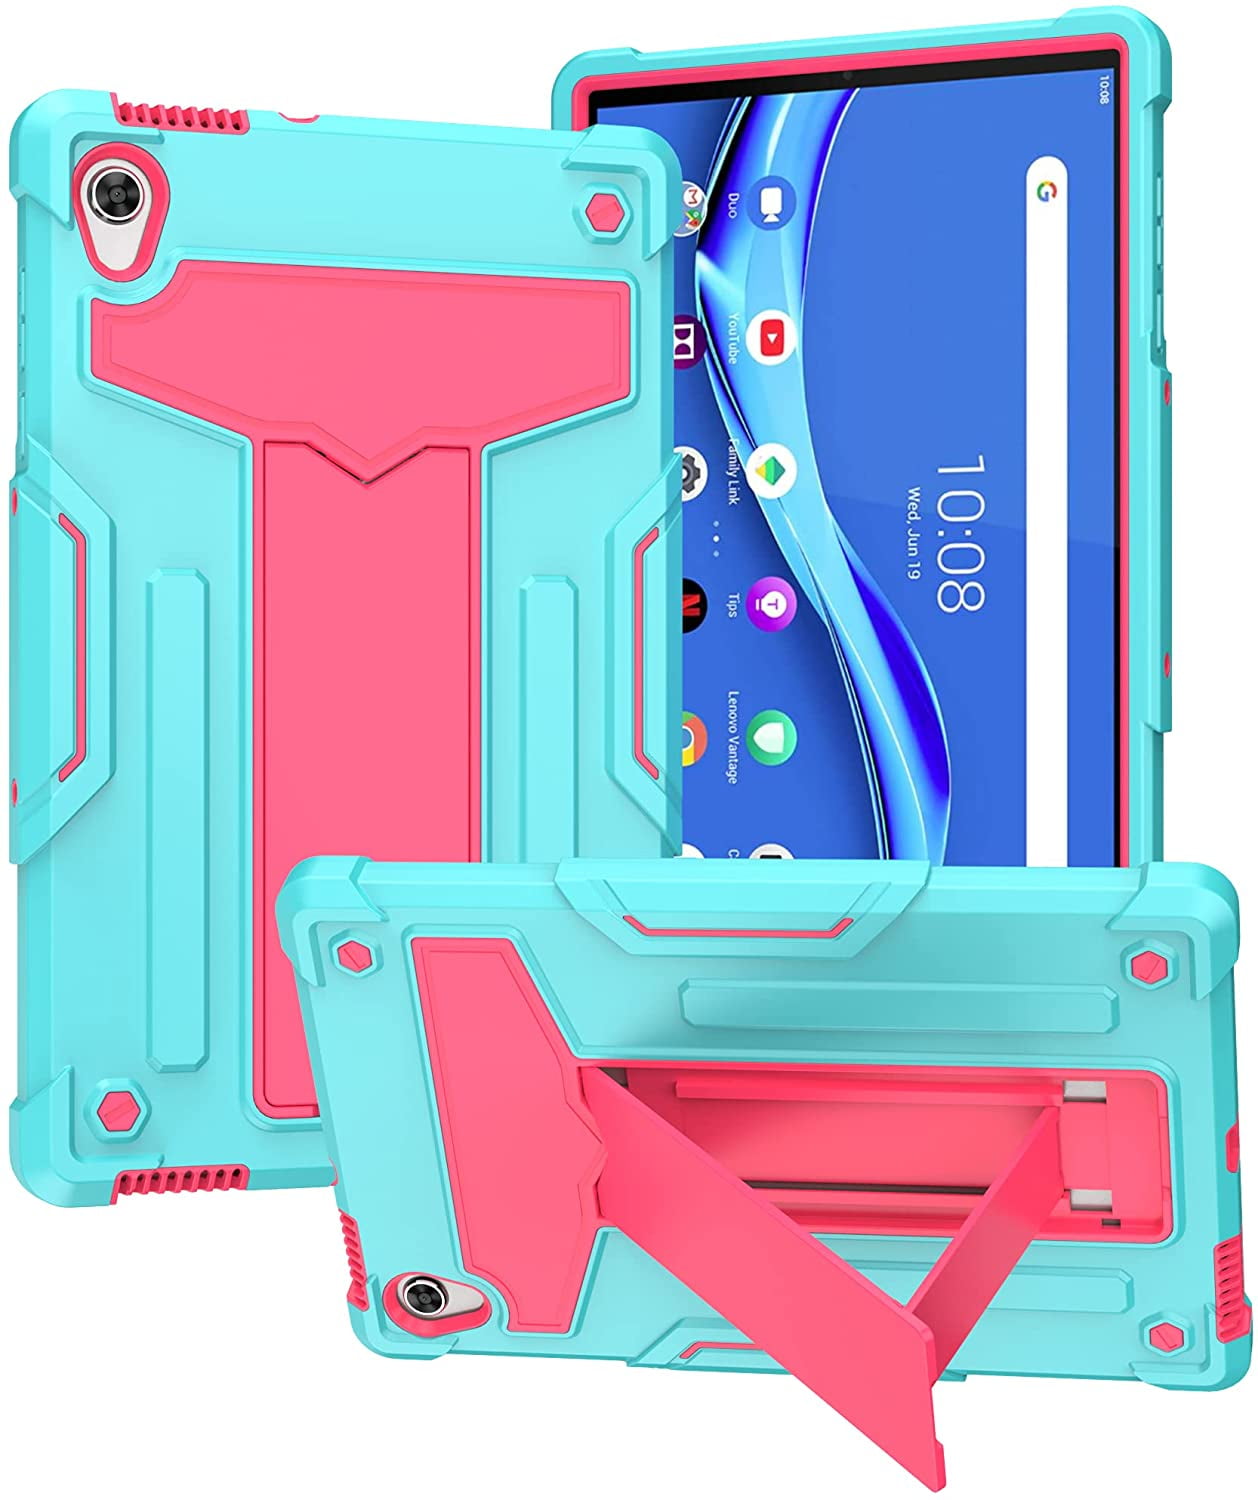 Epicgadget Case for Lenovo Tab M10 HD (2nd Gen)/Smart Tab M10 HD (2nd Gen)  TB-X306F/TB-X306X - Hybrid Case Cover with Kickstand for Lenovo Tab M10 HD  10.1 Inch Tablet 2020 Released (Teal/Pink) 